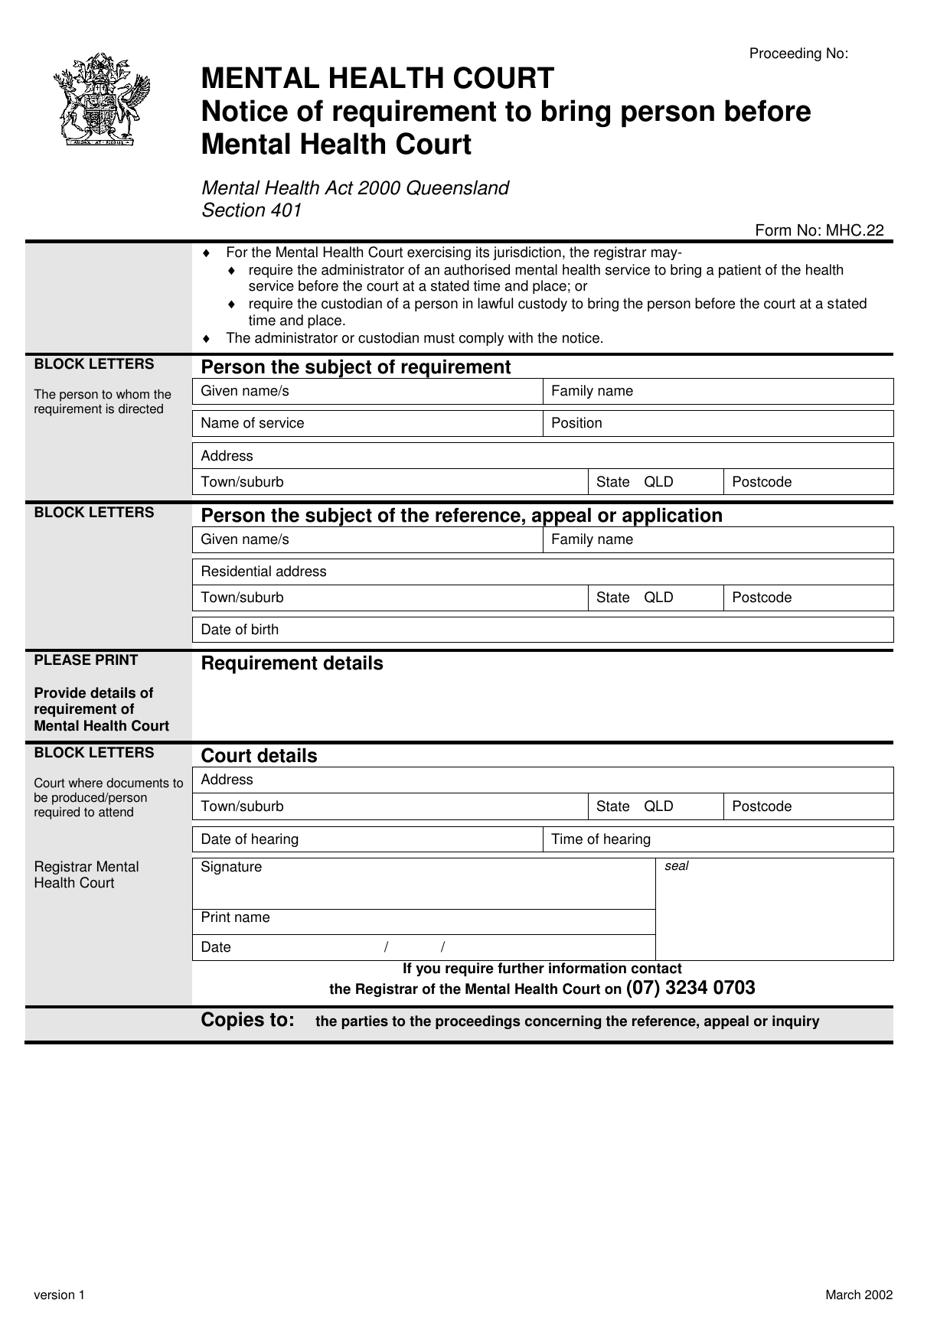 Form 22 Notice of Requirement to Bring Person Before Mental Health Court - Queensland, Australia, Page 1